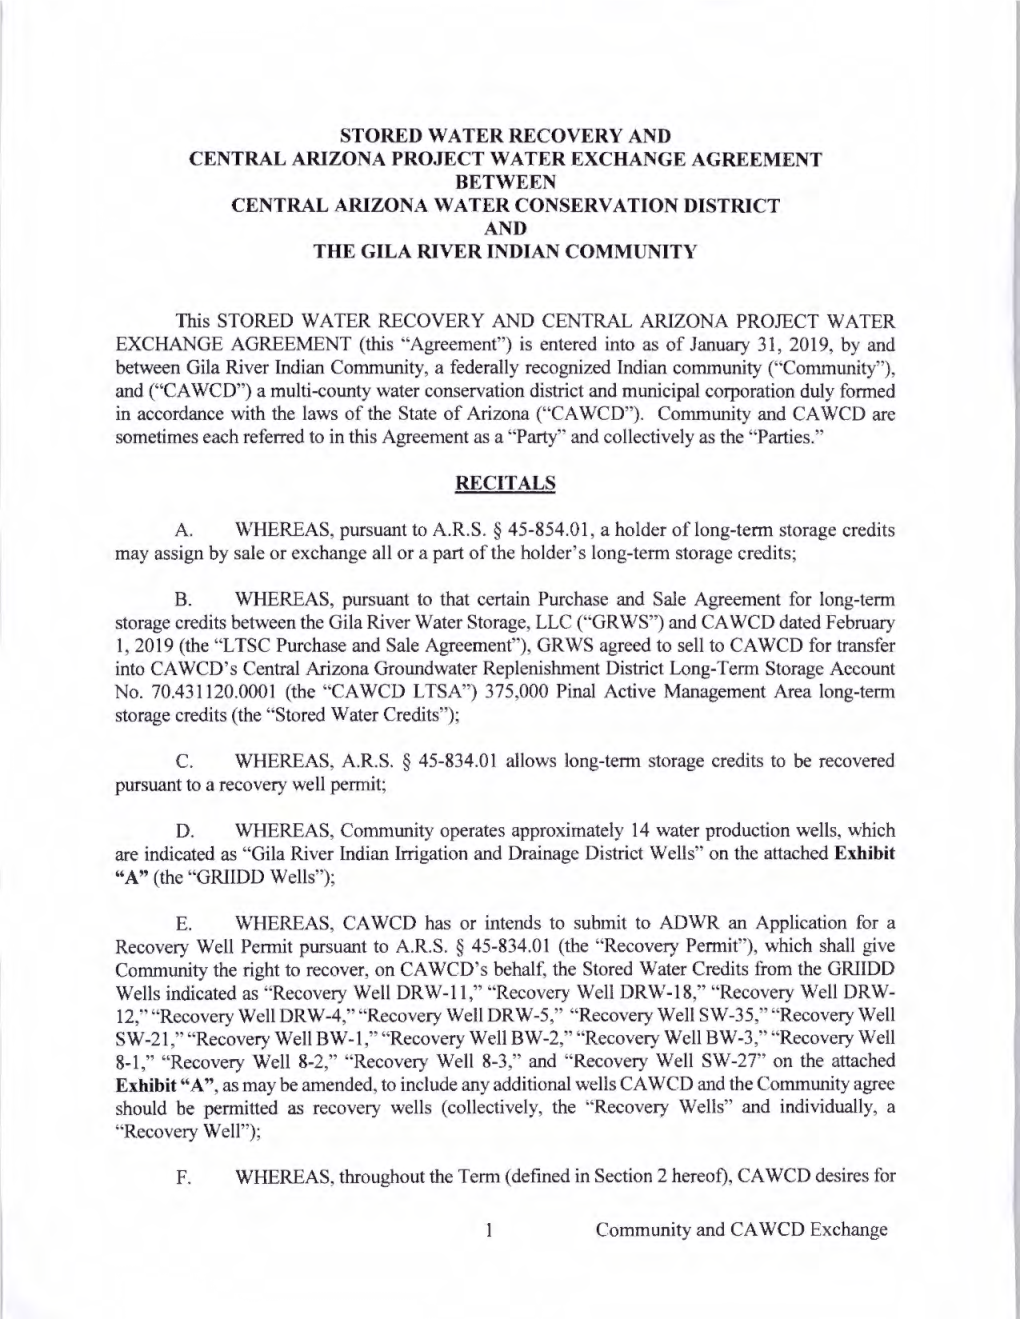 Stored Water Recovery and Central Arizona Project Water Exchange Agreement Between Central Arizona Water Conservation District and the Gila River Indian Community